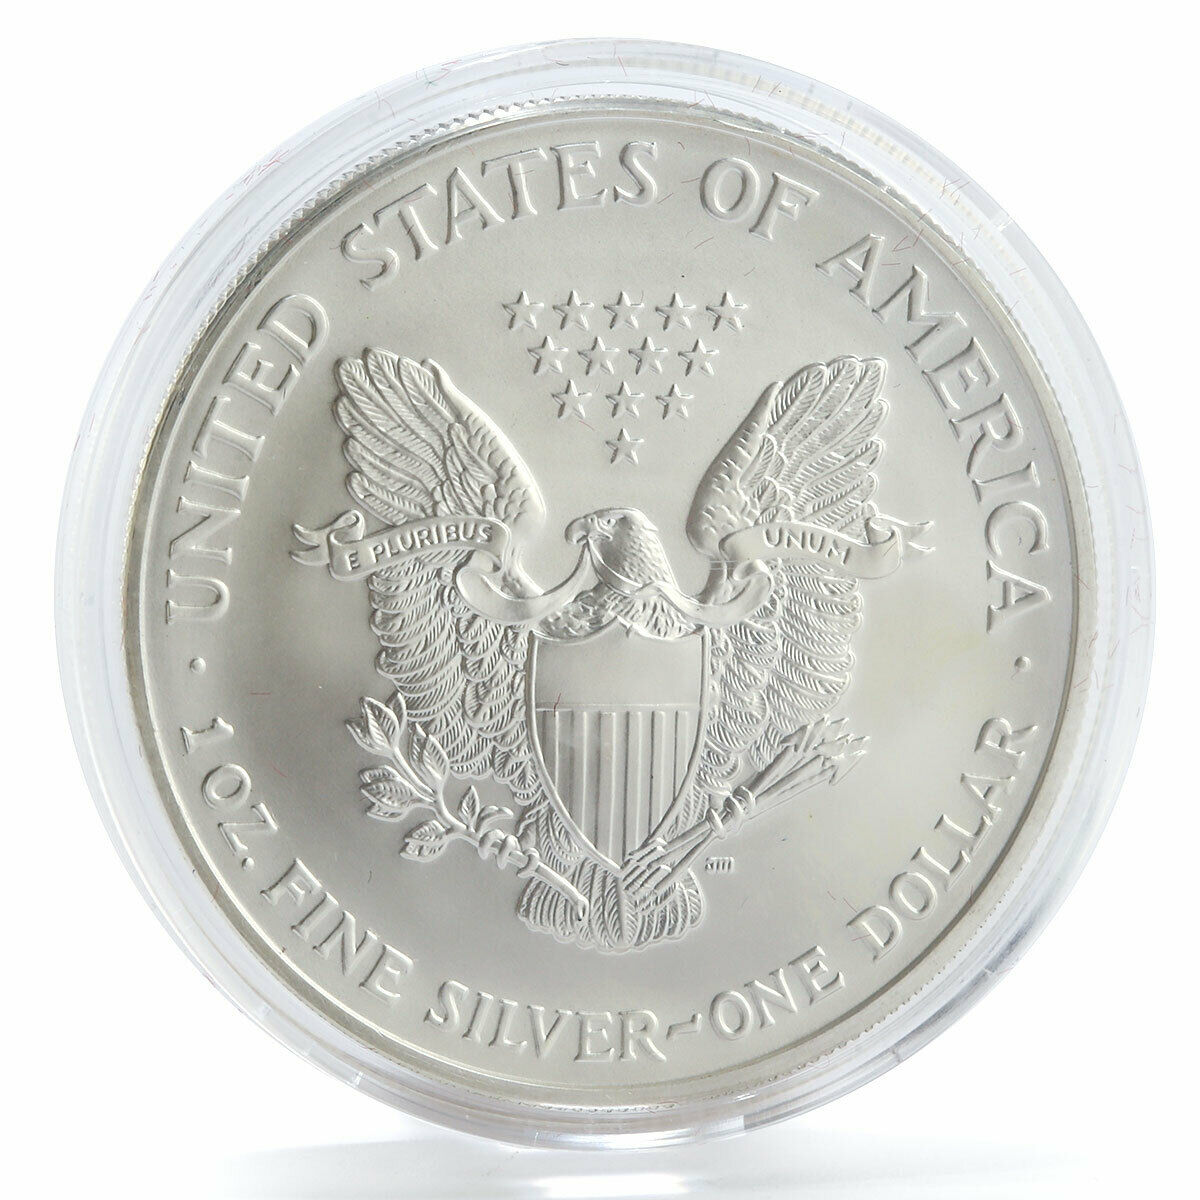 photos of all us liberty coins